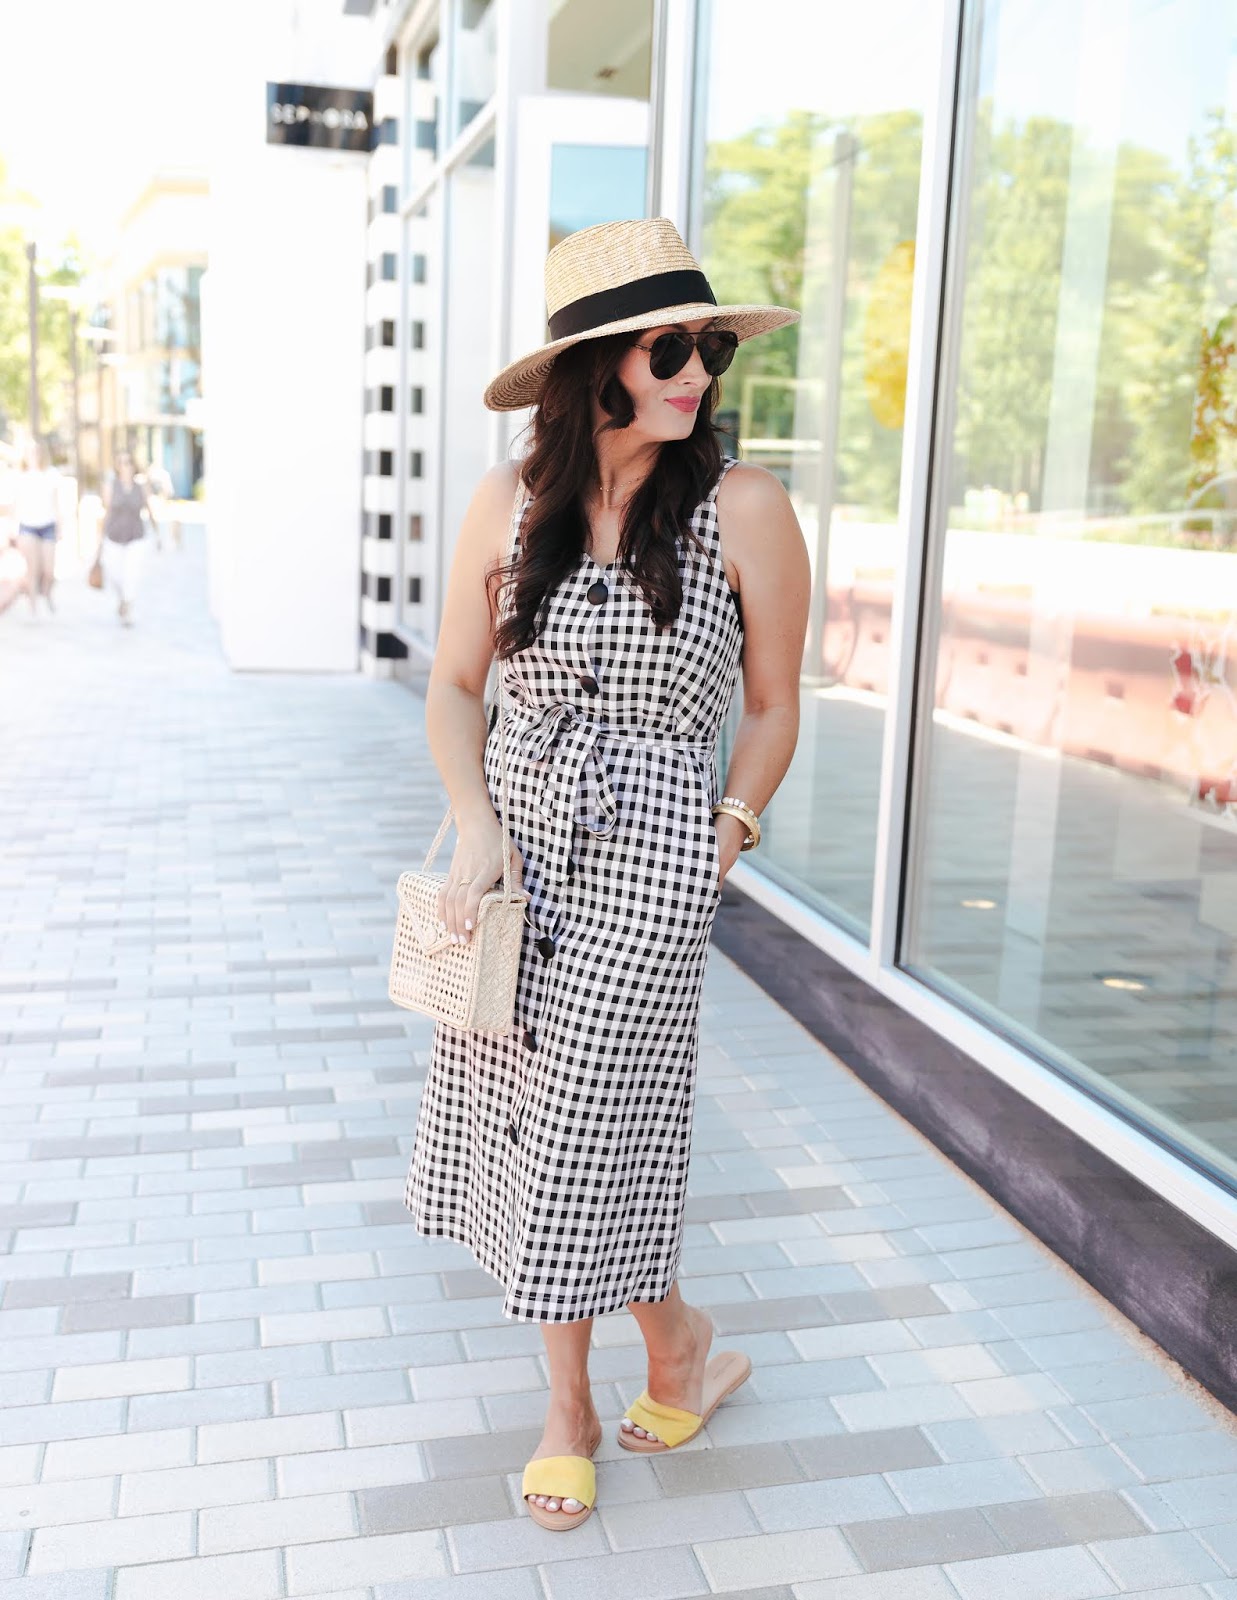 Three Summer Trends That Will Transition Into Fall - Ashley Donielle